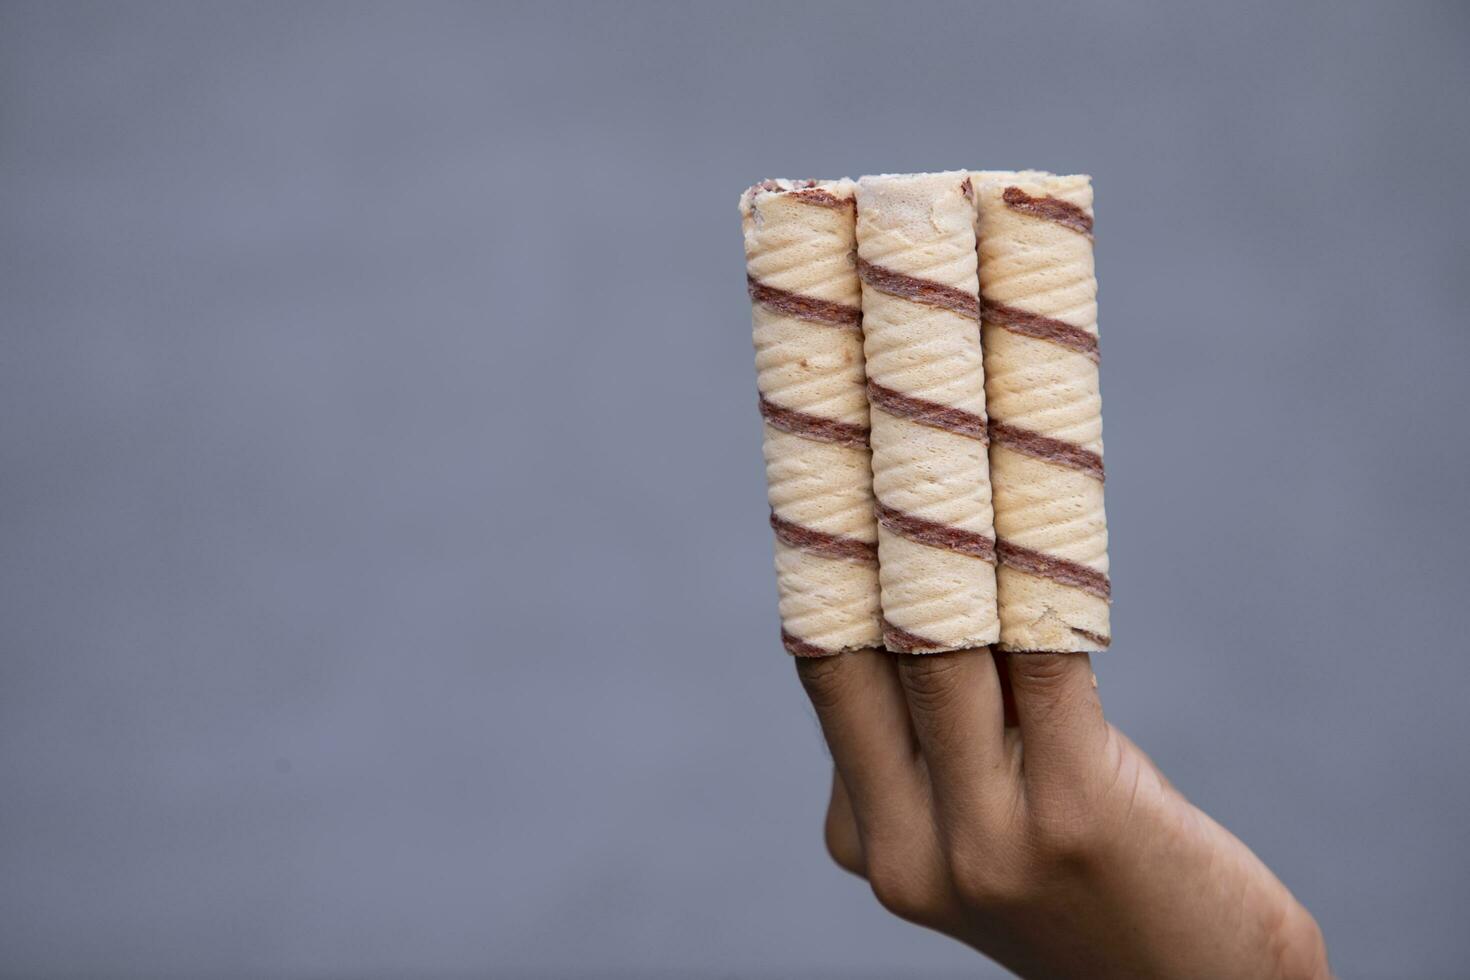 Hand-holding wafer rolls with chocolate on gray background, close up photo